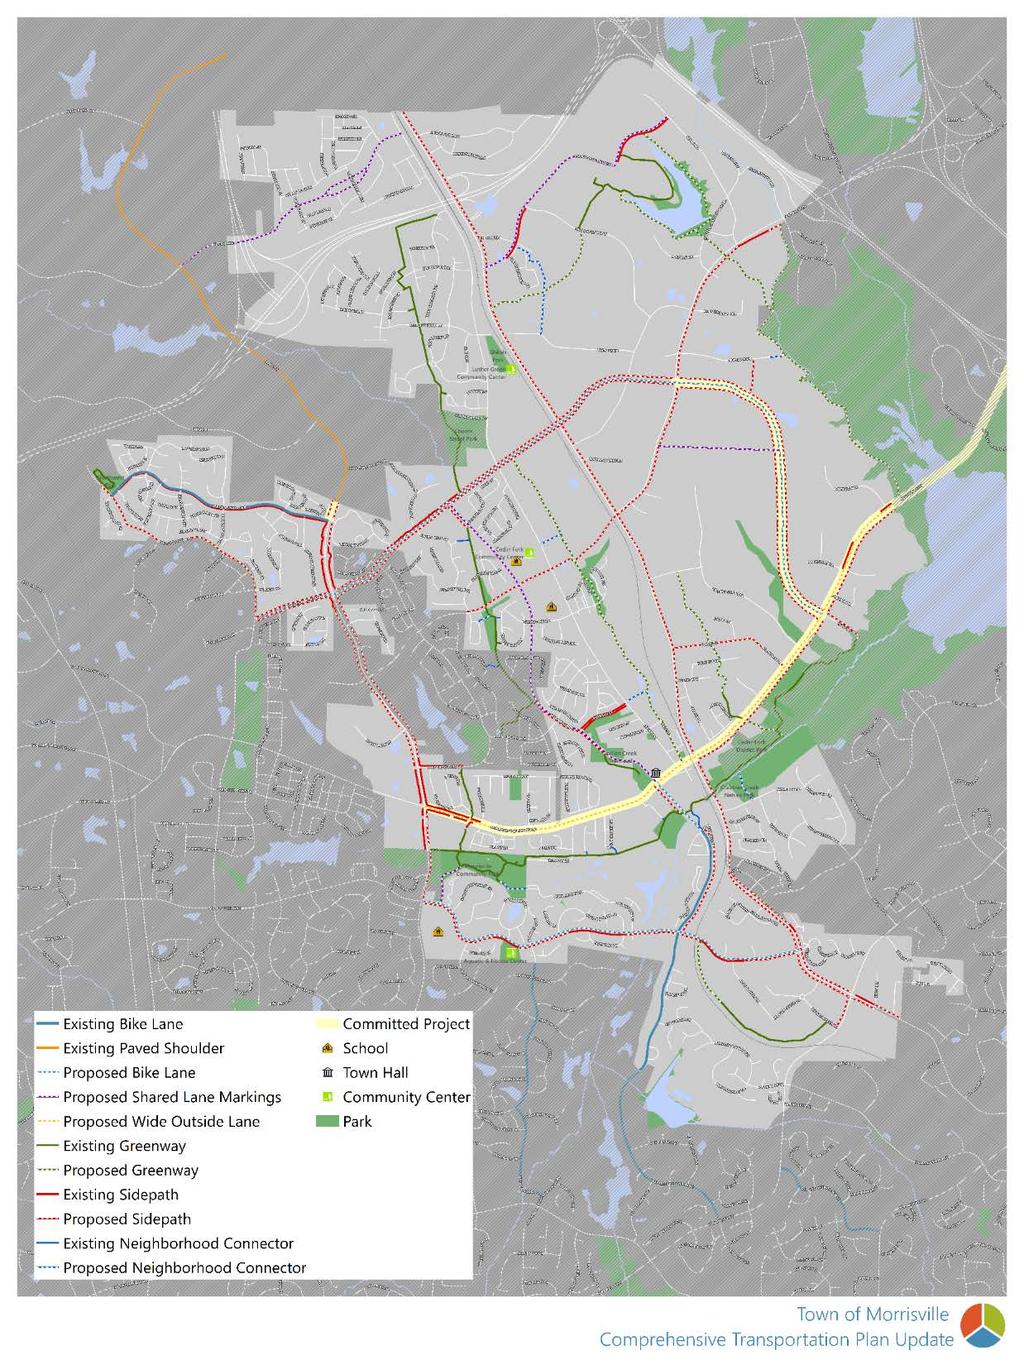 MULTIMODAL RECOMMENDATIONS Miles of Recommendations (Committed and Proposed) Proposed Greenway 7 miles Proposed Neighborhood Connectors 1.2 miles Sidepaths 24 miles Bike Lanes 6.